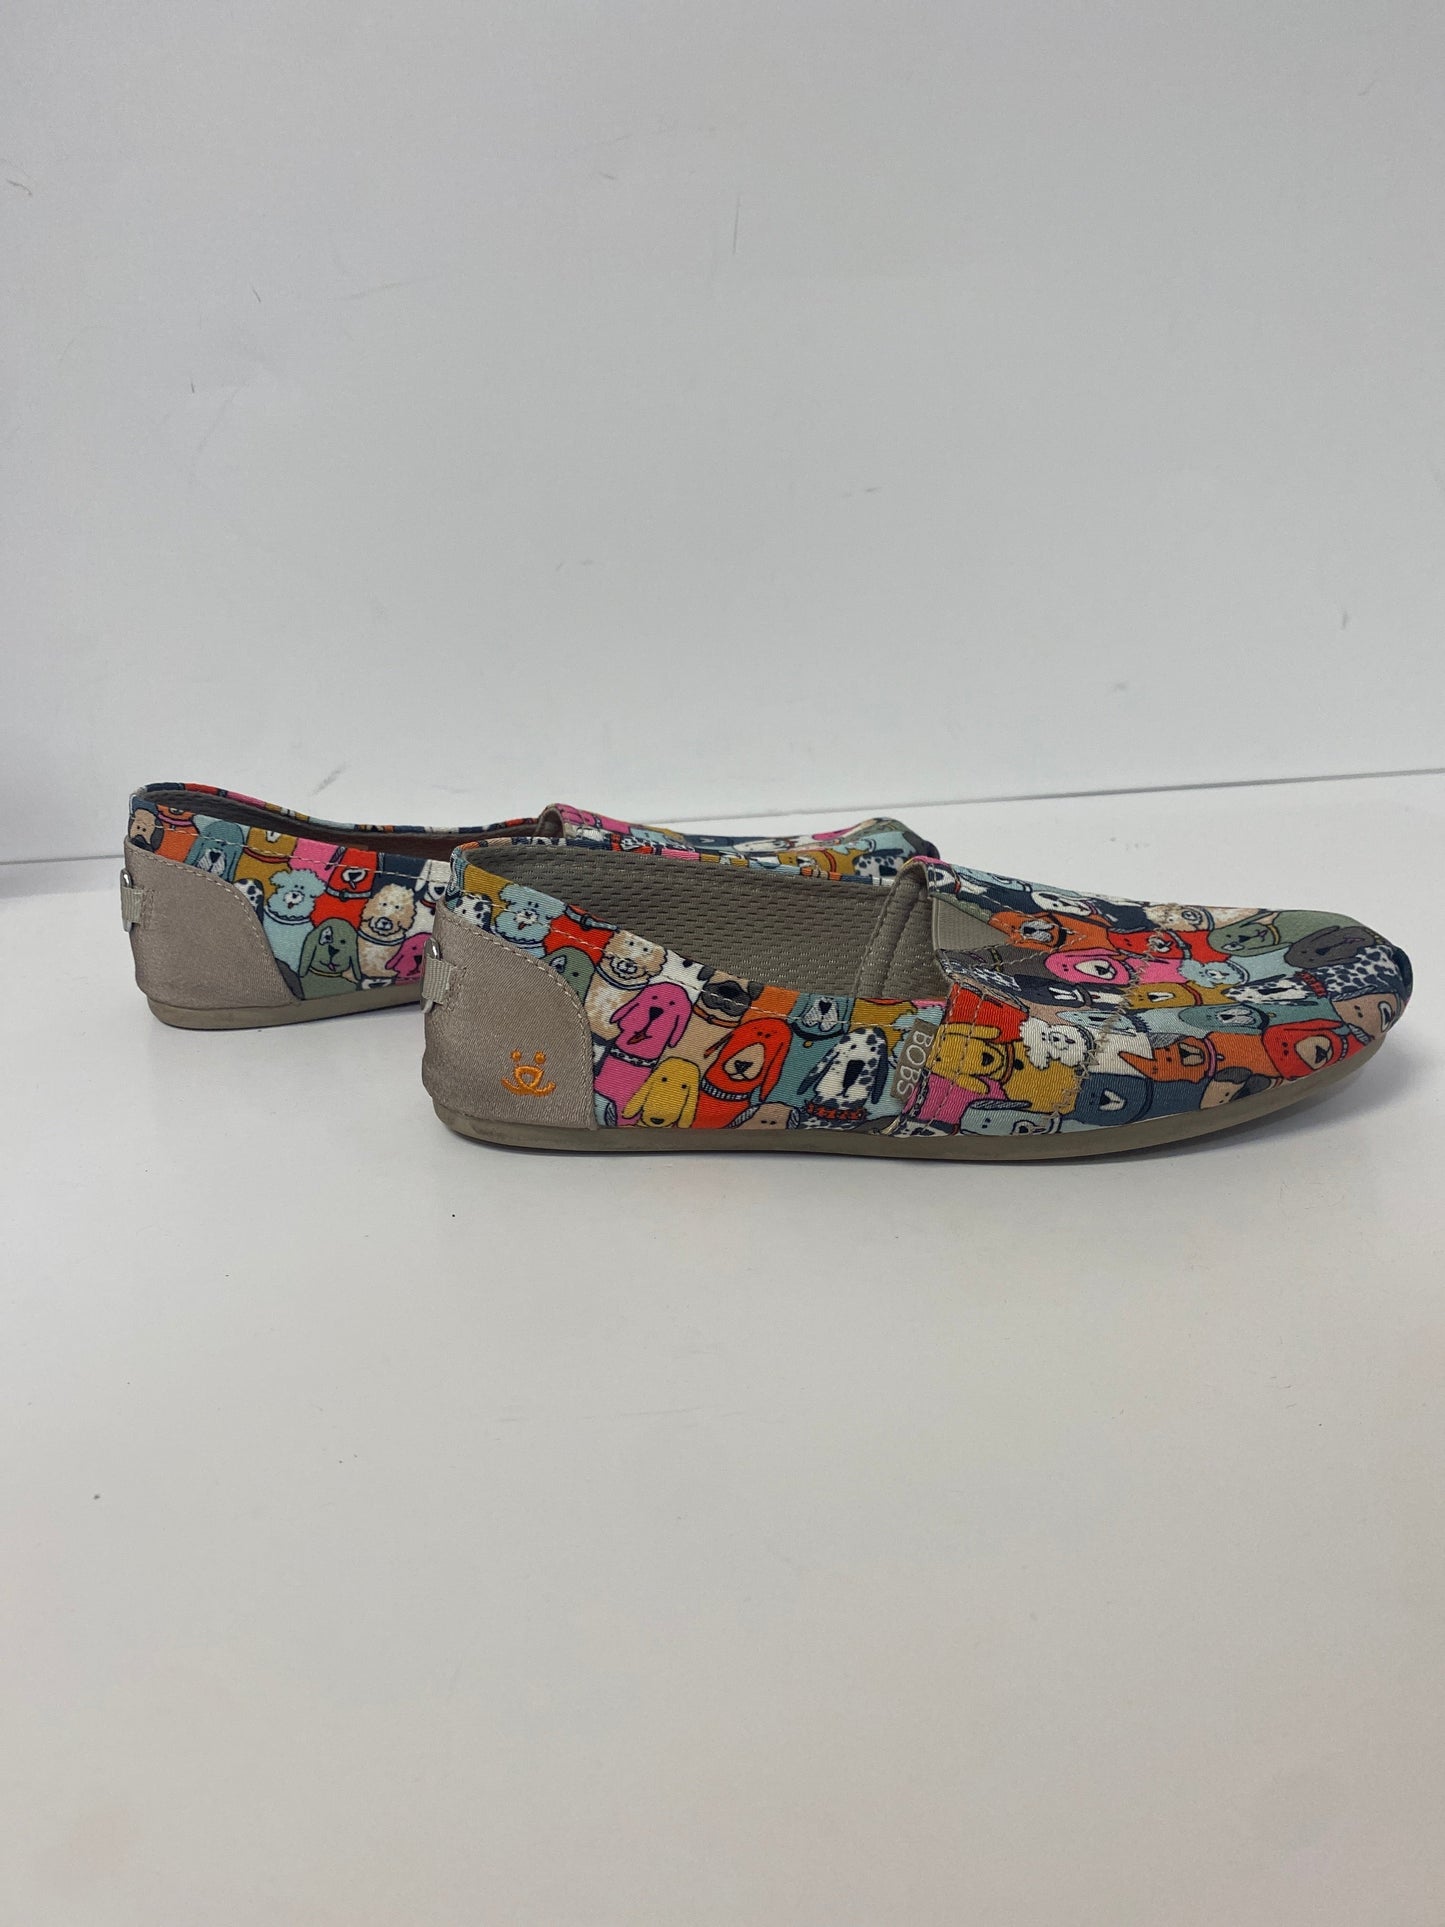 Multi-colored Shoes Flats Bobs, Size 9